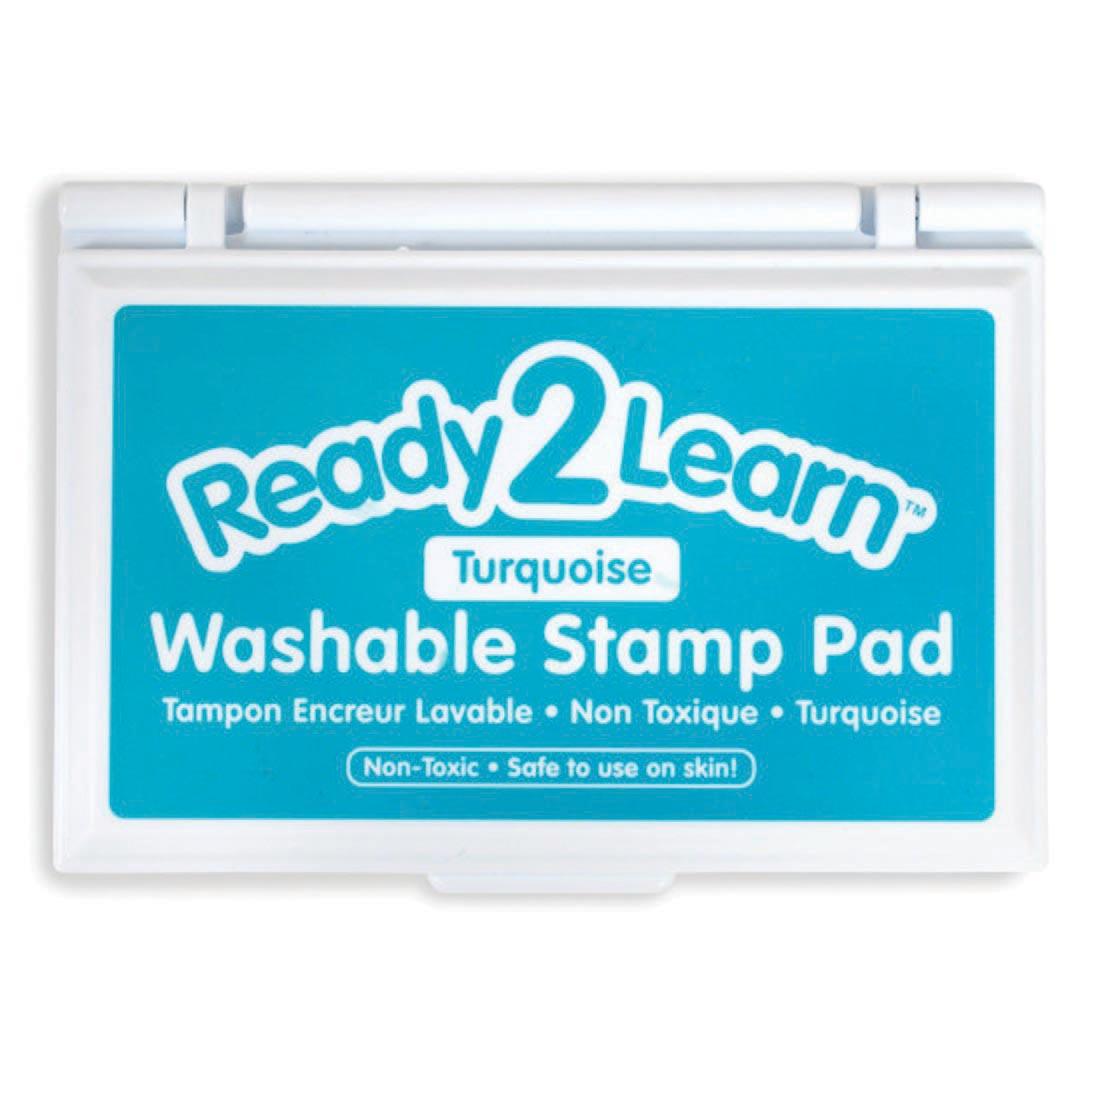 Ready 2 Learn Turquoise Washable Stamp Pad